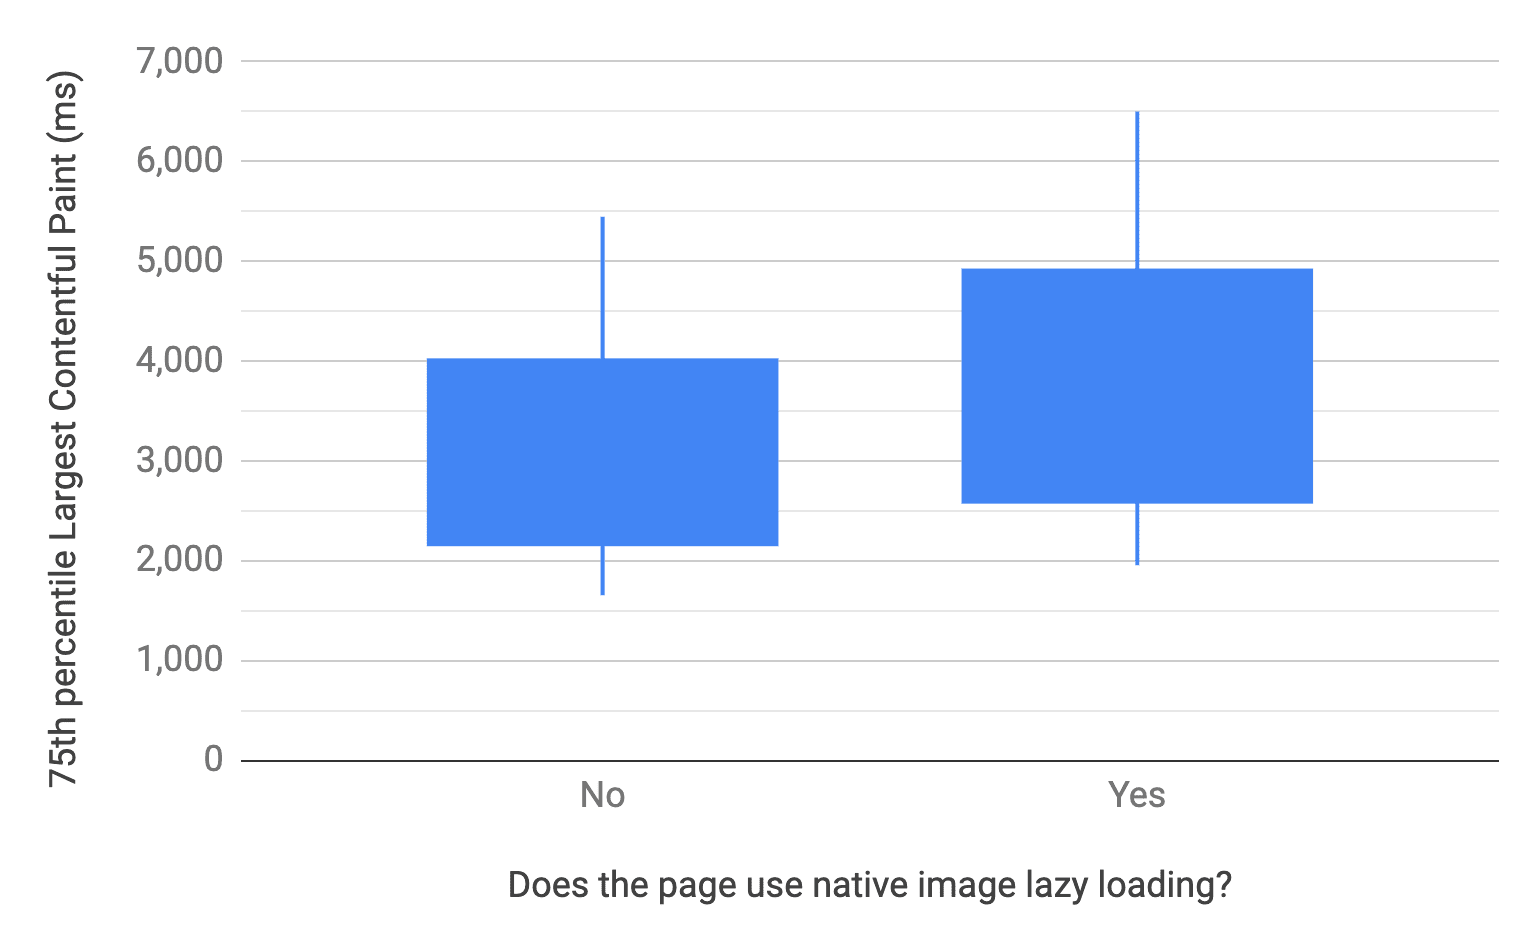 Box and whisker chart showing the 10, 25, 75, and 90th percentiles for pages that do and do not use native image lazy loading. Comparatively, the LCP distribution of pages that do not use it is faster than those that do.